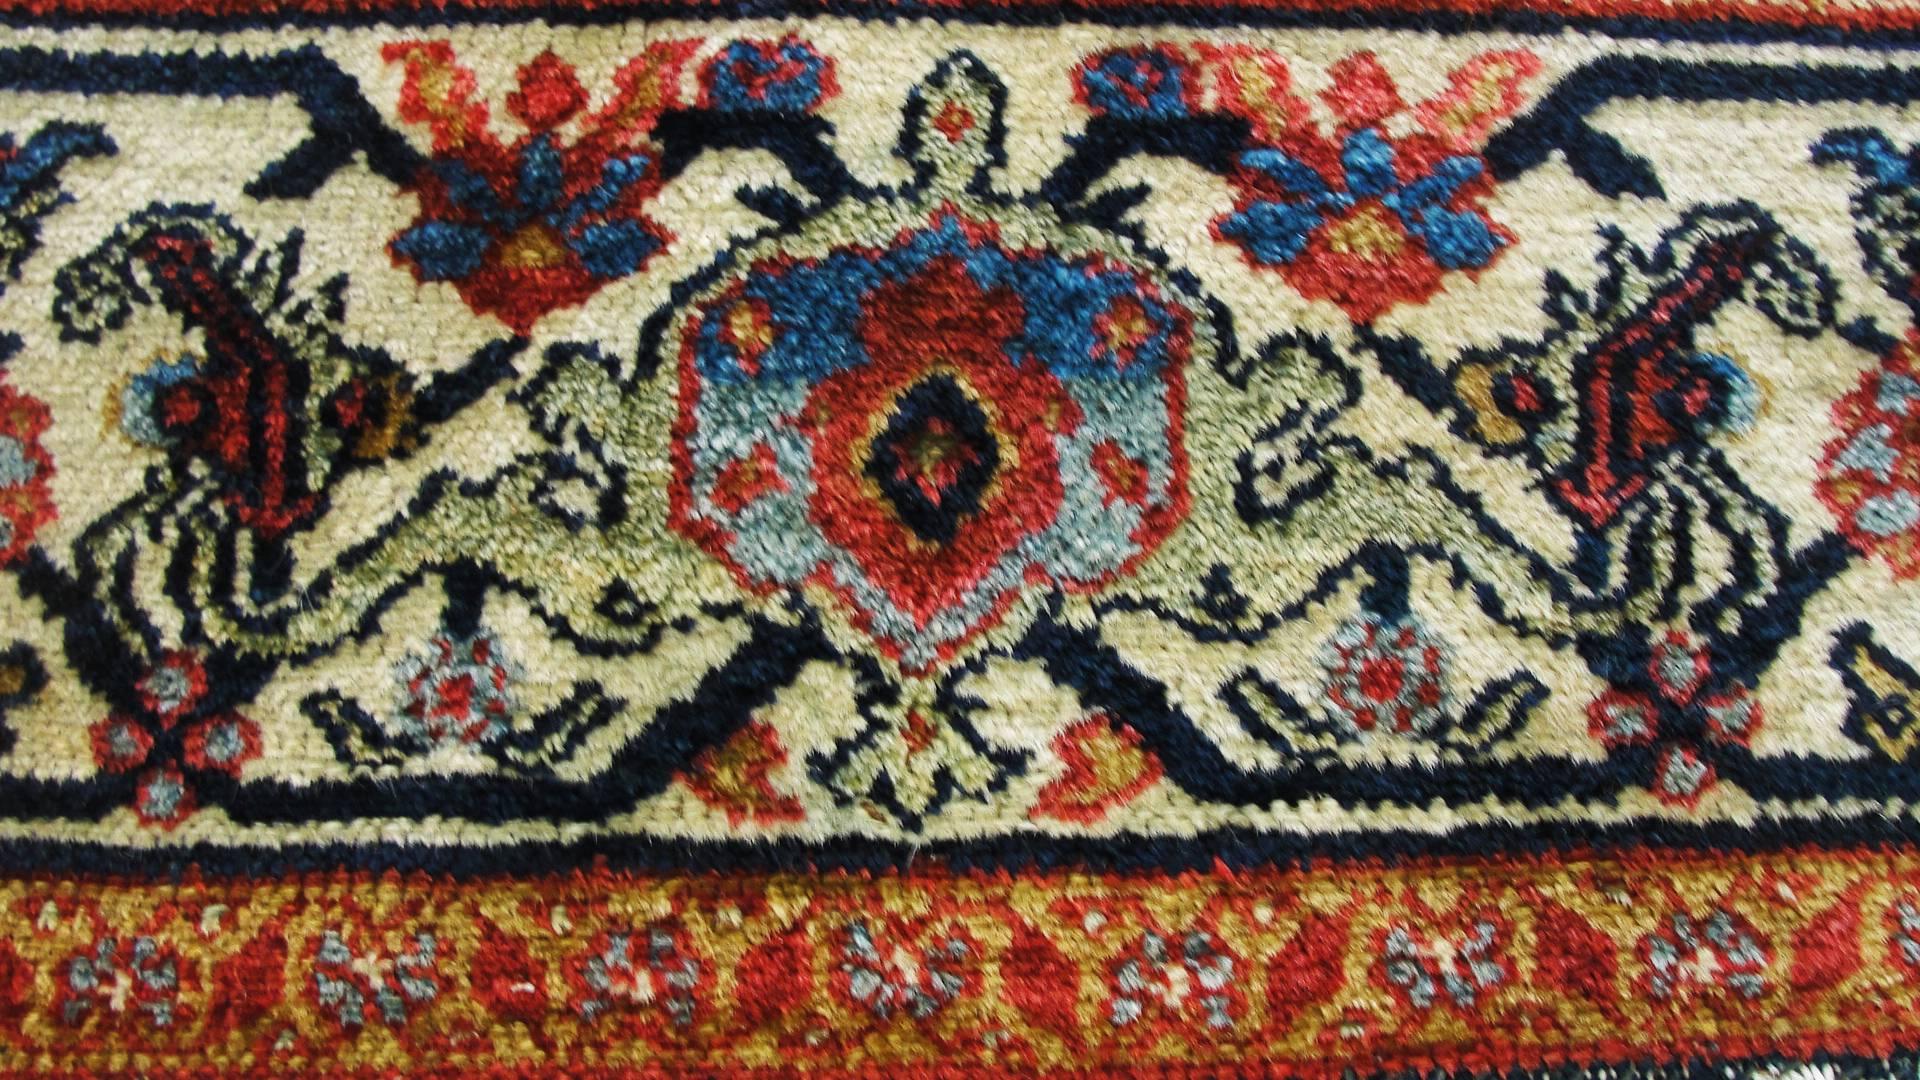  Antique Persian Senneh Malayer Carpet, Gallery/Runner Size In Excellent Condition For Sale In Evanston, IL